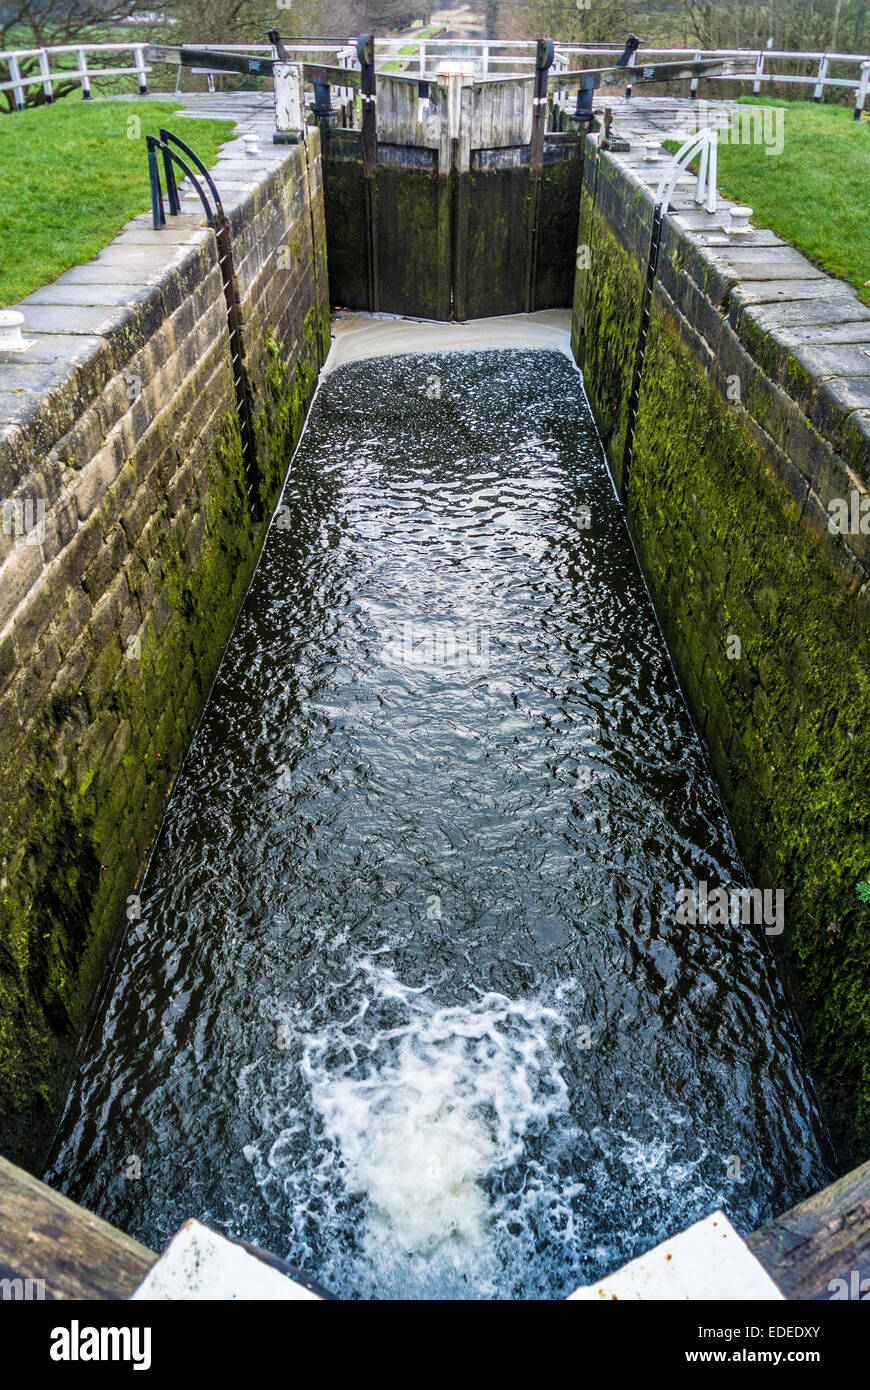 Serratura Hirst, Leeds Liverpool Canal, Saltaire, West Yorkshire, Regno Unito. Foto Stock